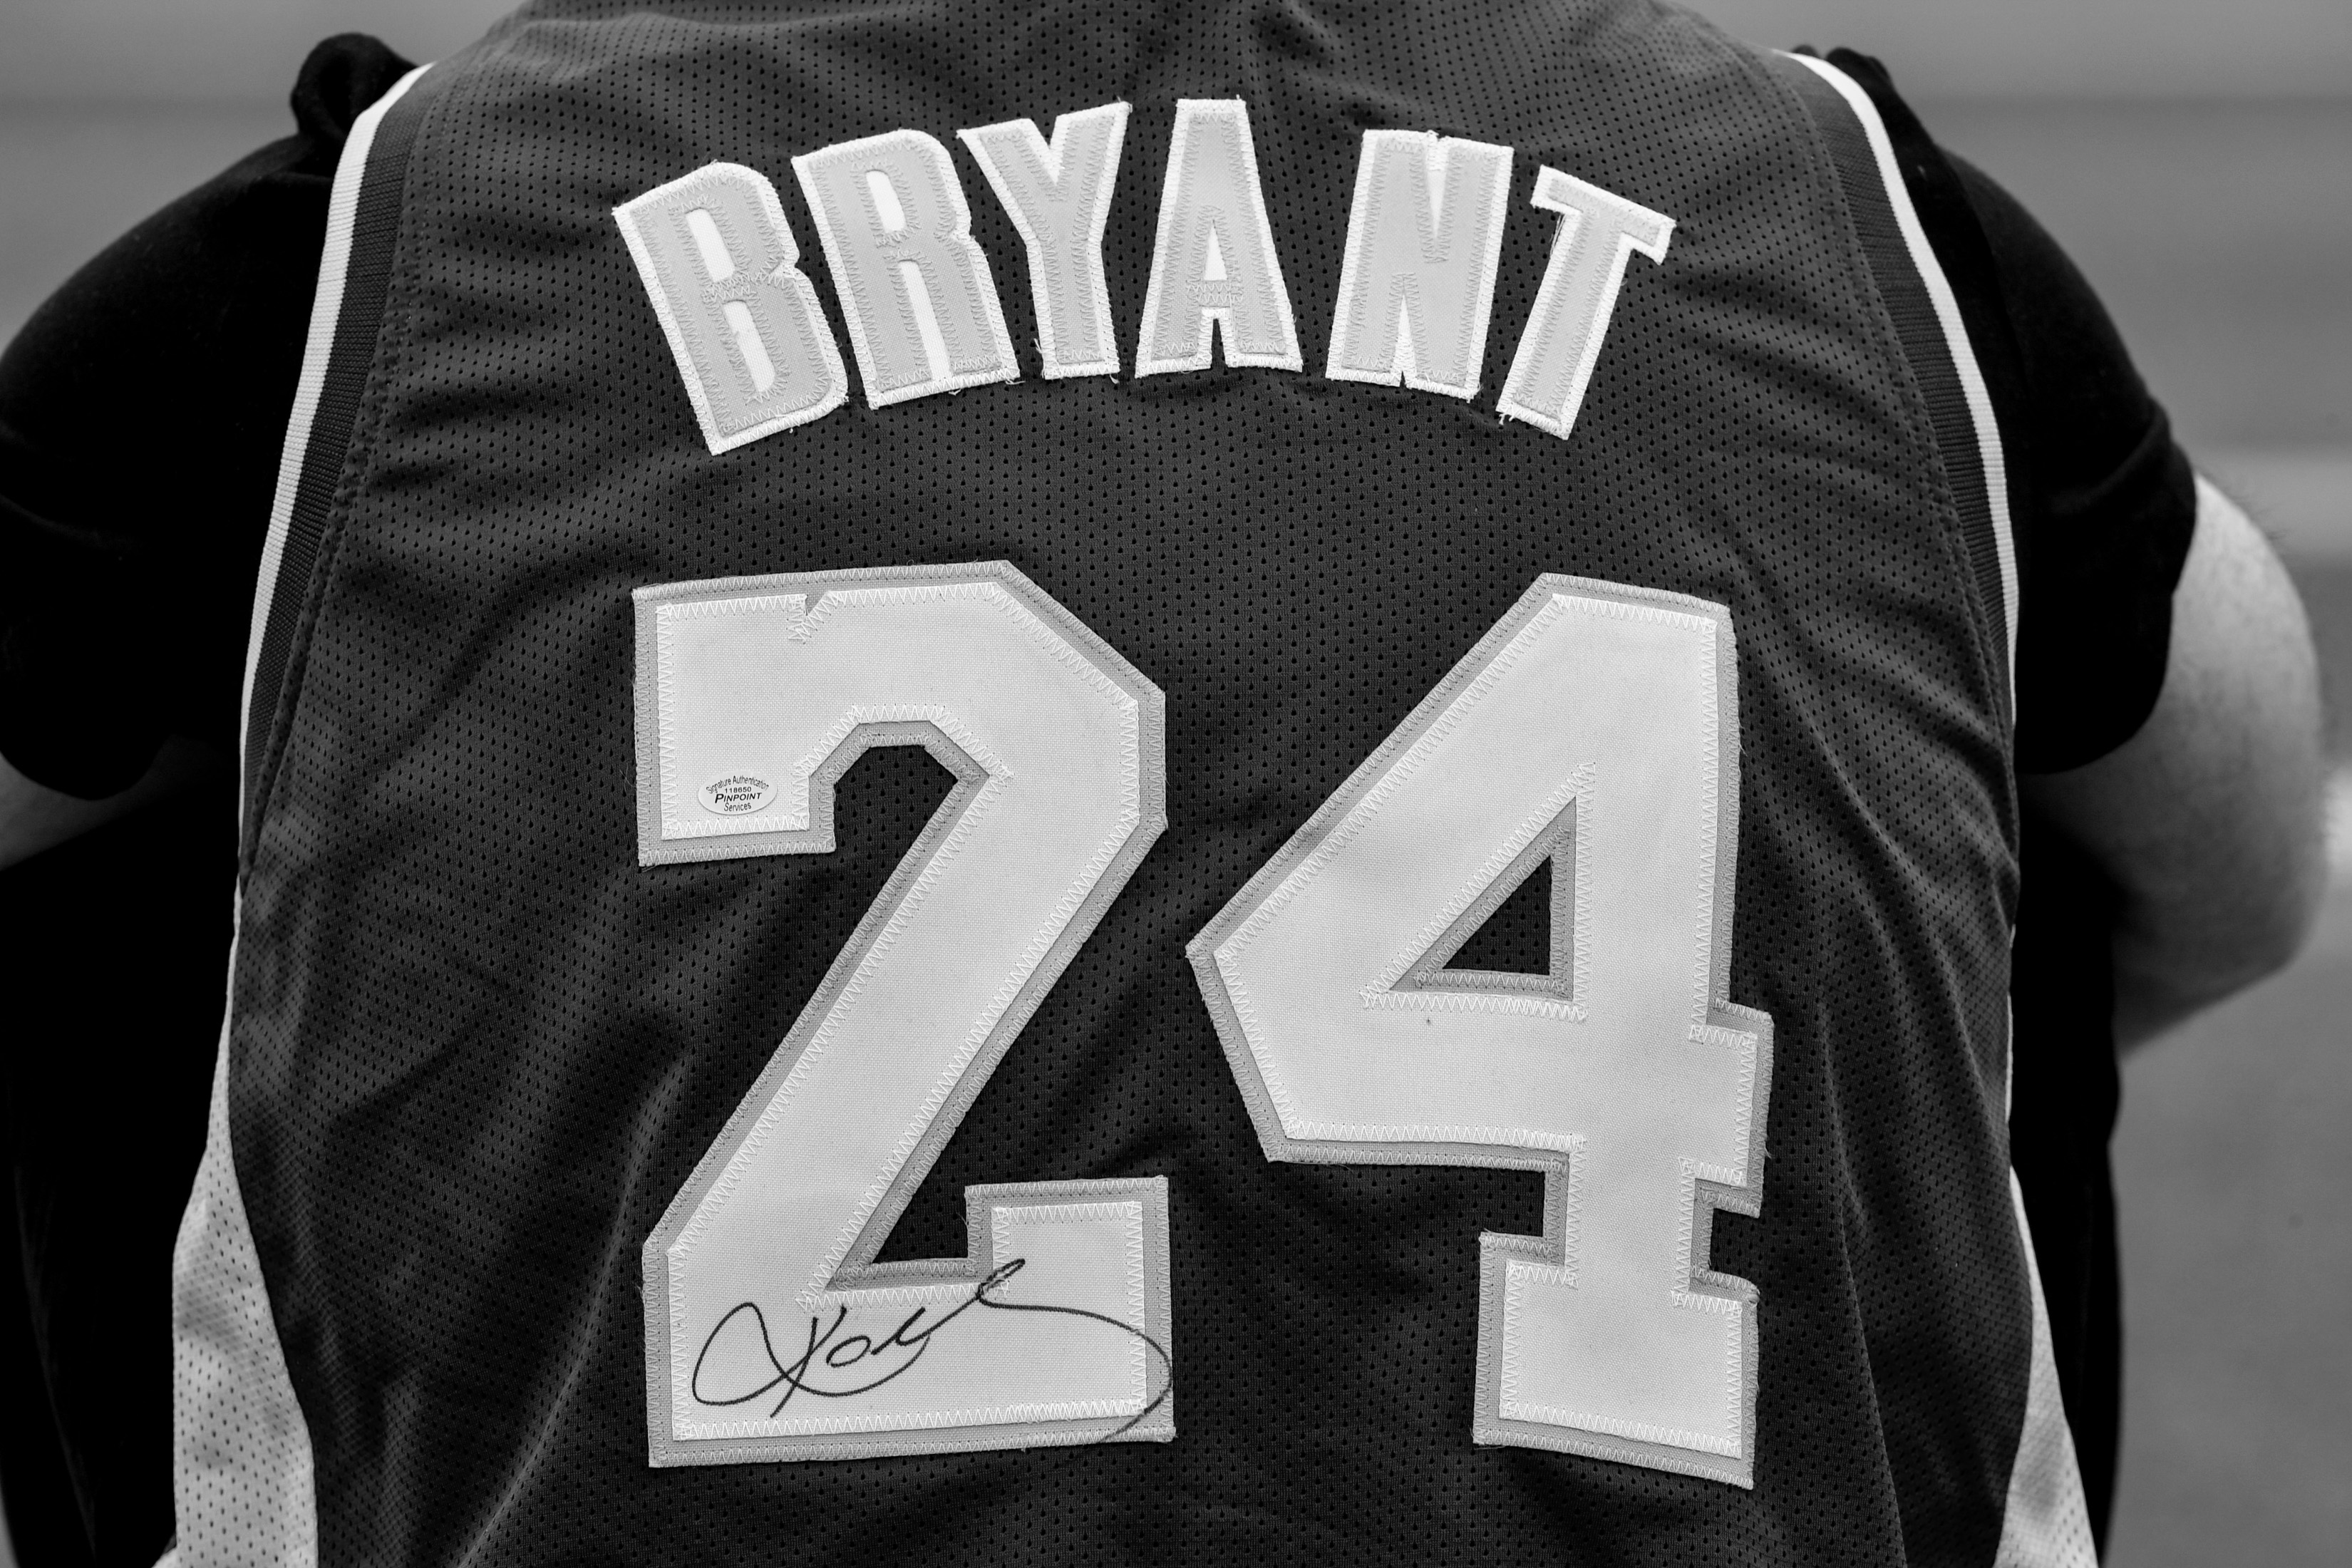 Kobe Bryant Signed Game-Worn Jersey to Be Auctioned Off, Could